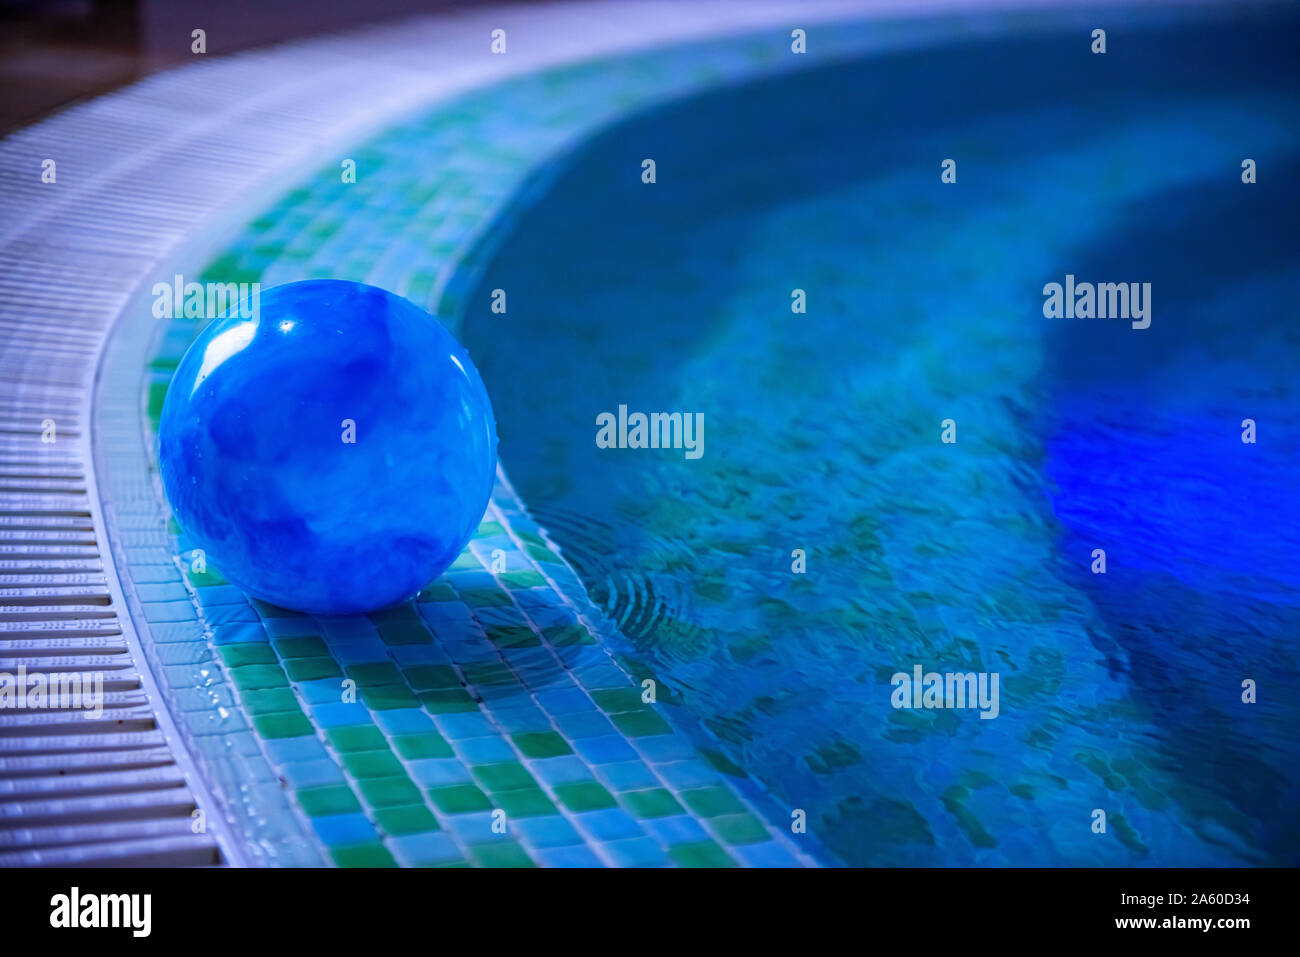 Blue ball is left in swimming pool decorated with blue and green mosaic tiles. Stairs are visible through shallow water. Summer season and private saf Stock Photo